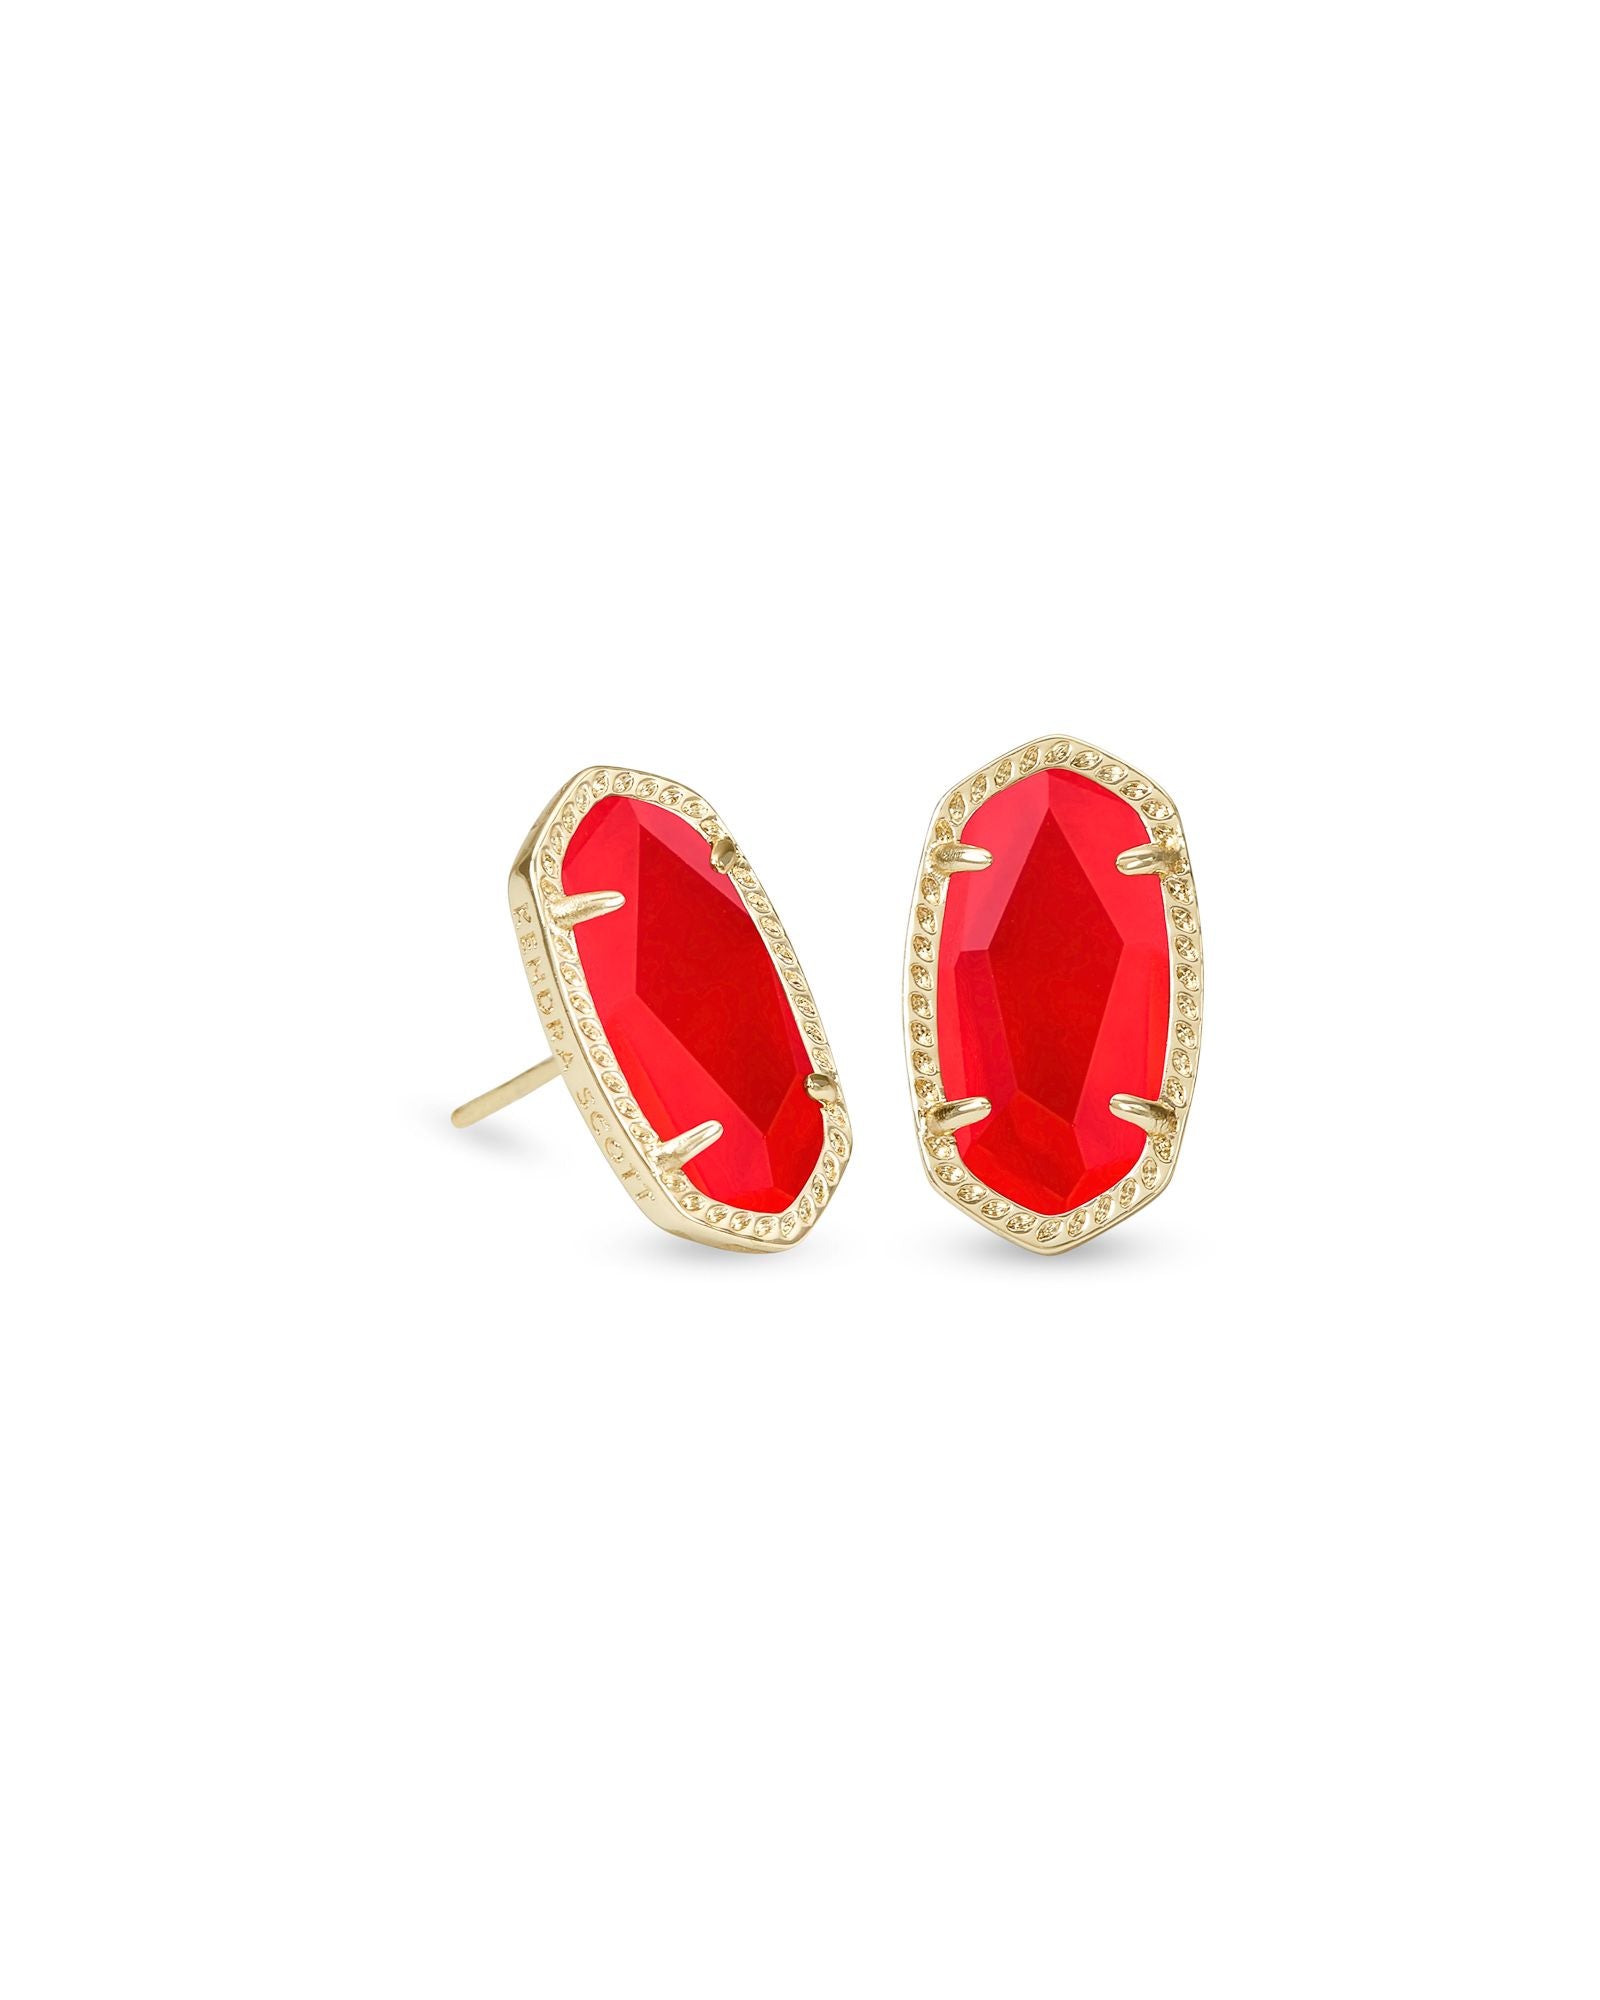 Ellie Stud Earrings Red Illusion Gold or Silver